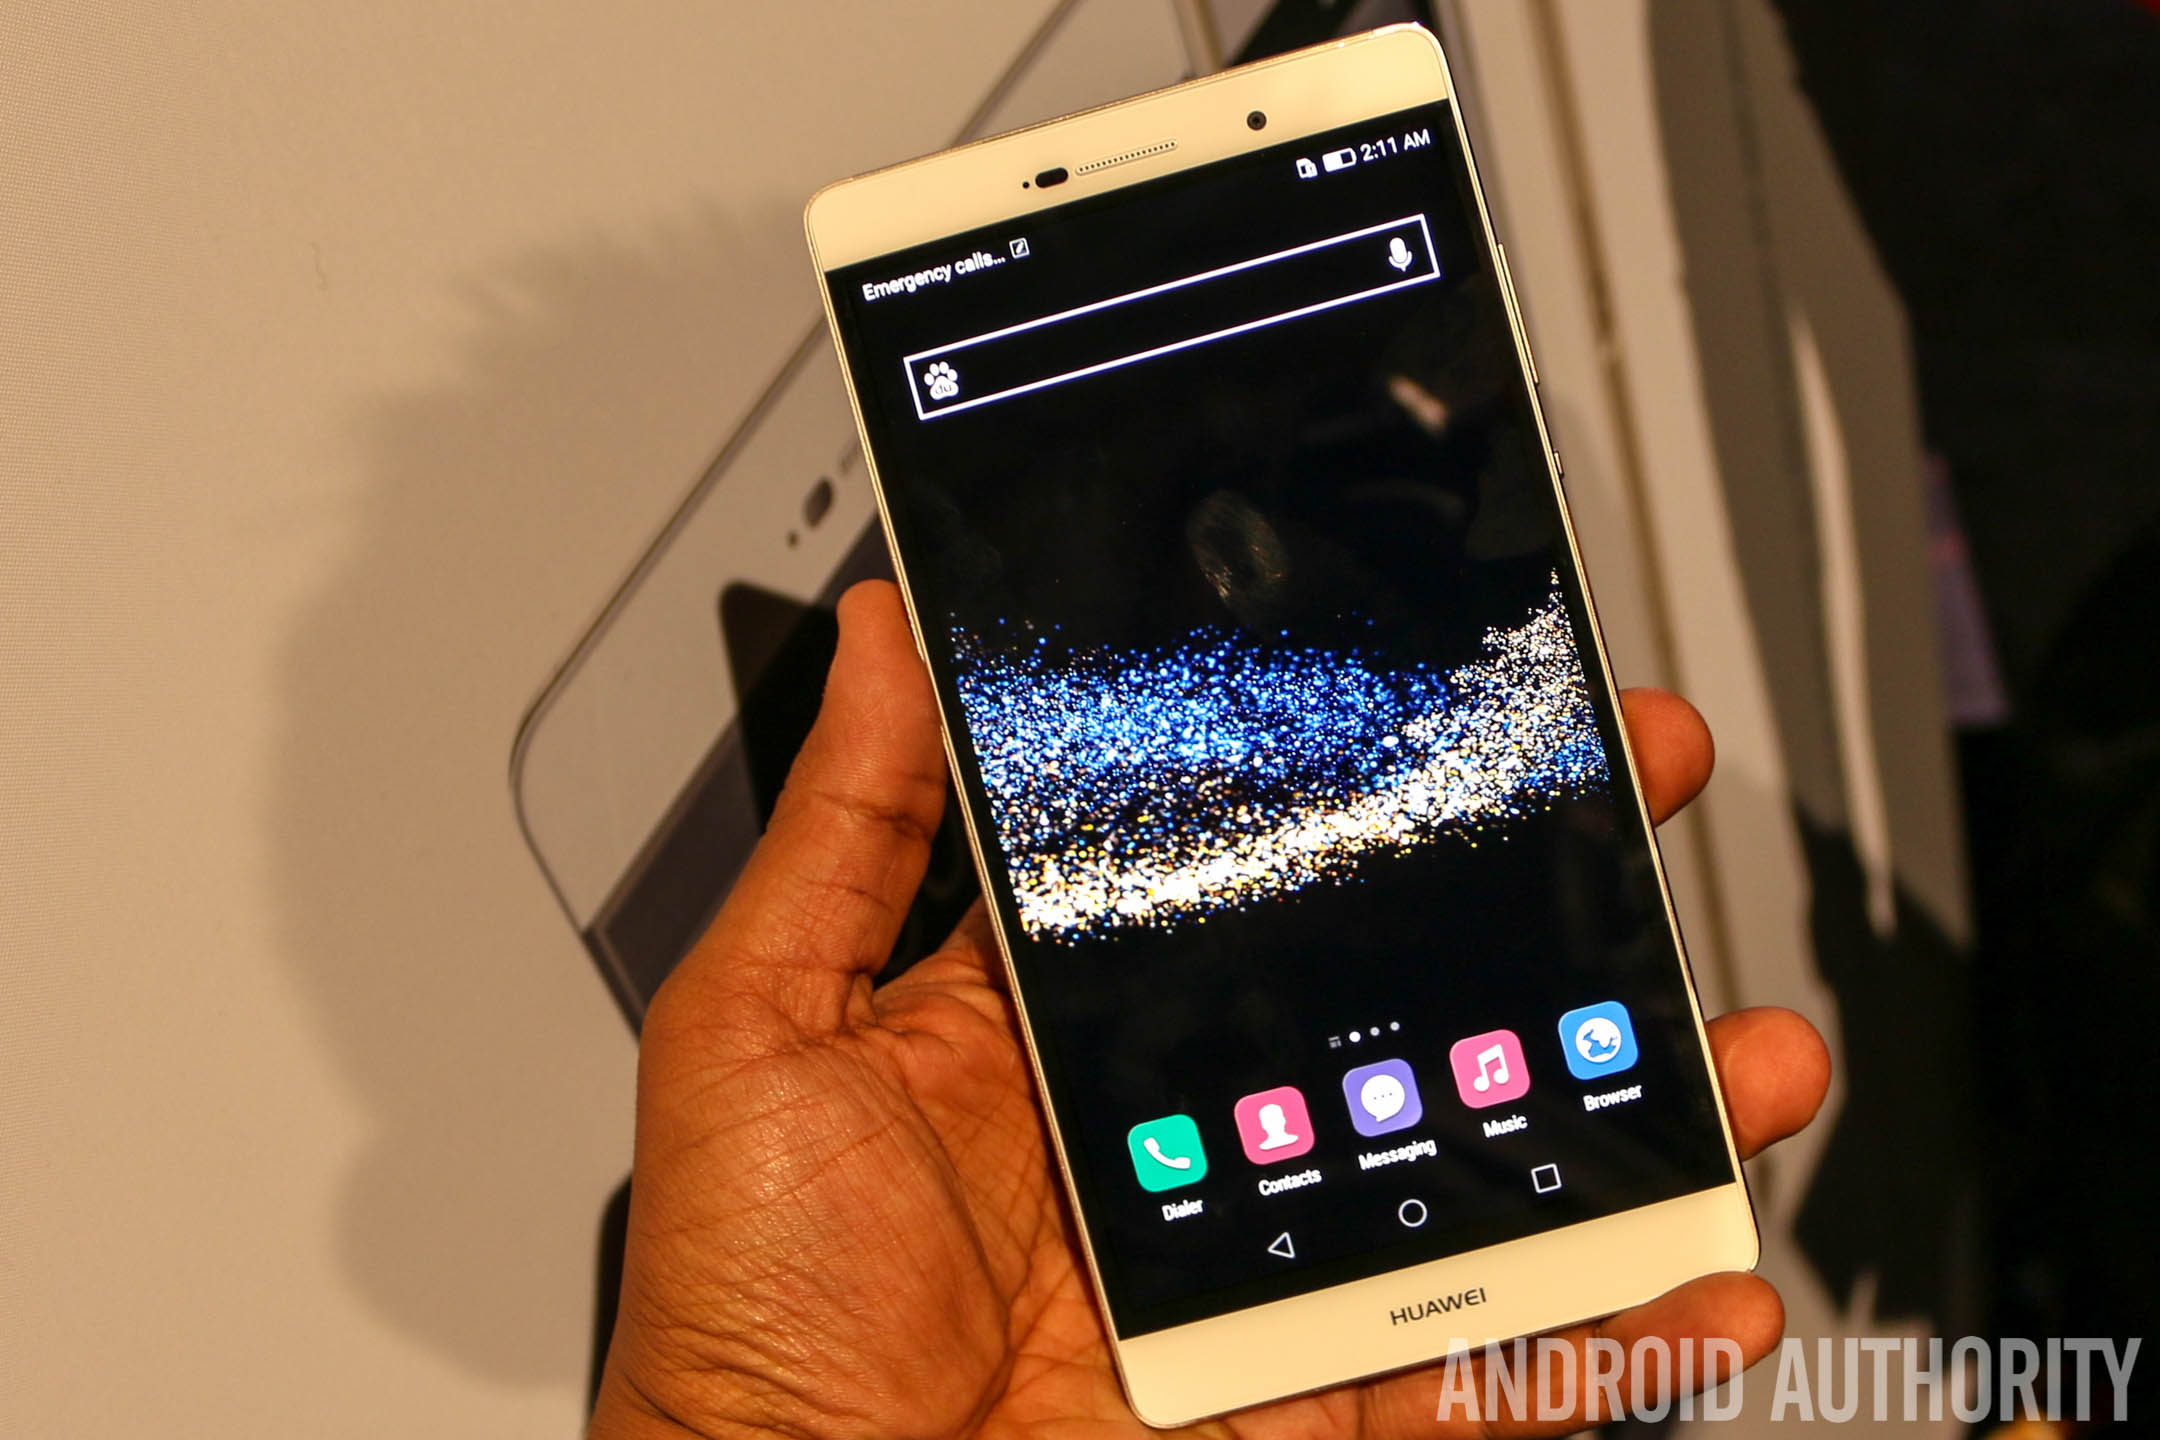 Kalmte Uitdaging Badkamer Hands-on with the humongous HUAWEI P8 Max - Android Authority